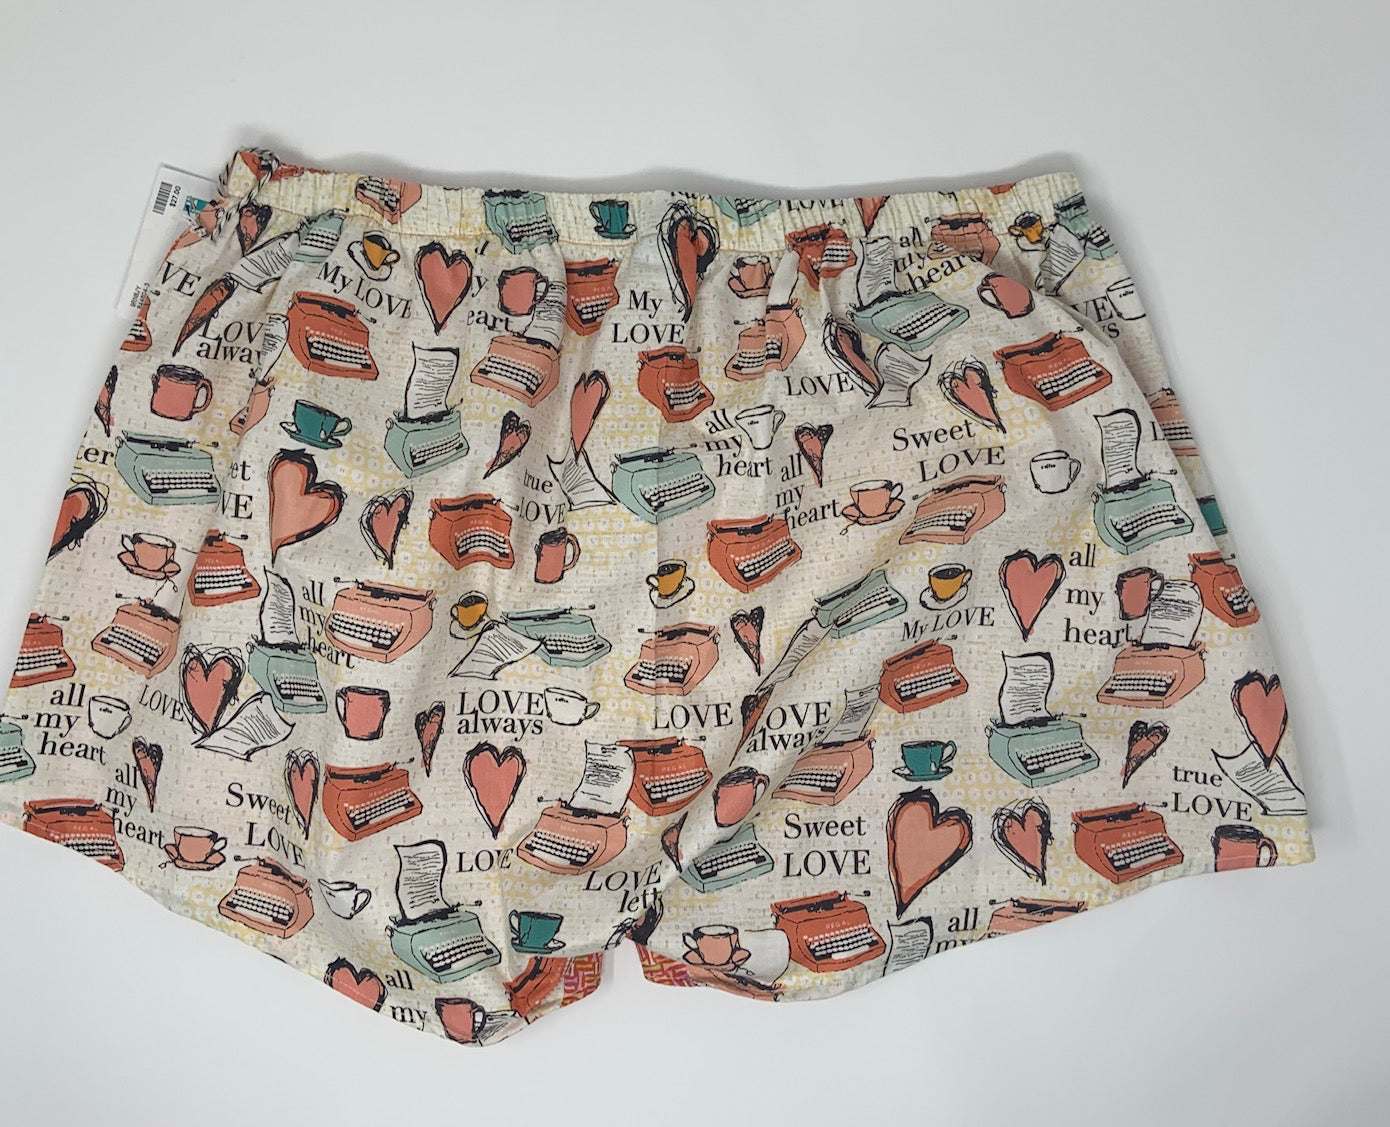 Love Cartoon Sleepie Beachie Boxer Shorts great for lounge, sleep, boat, beach, lunch, fun. 
SIZE SMALL fits women's 0-4BoxersOliver Green CT